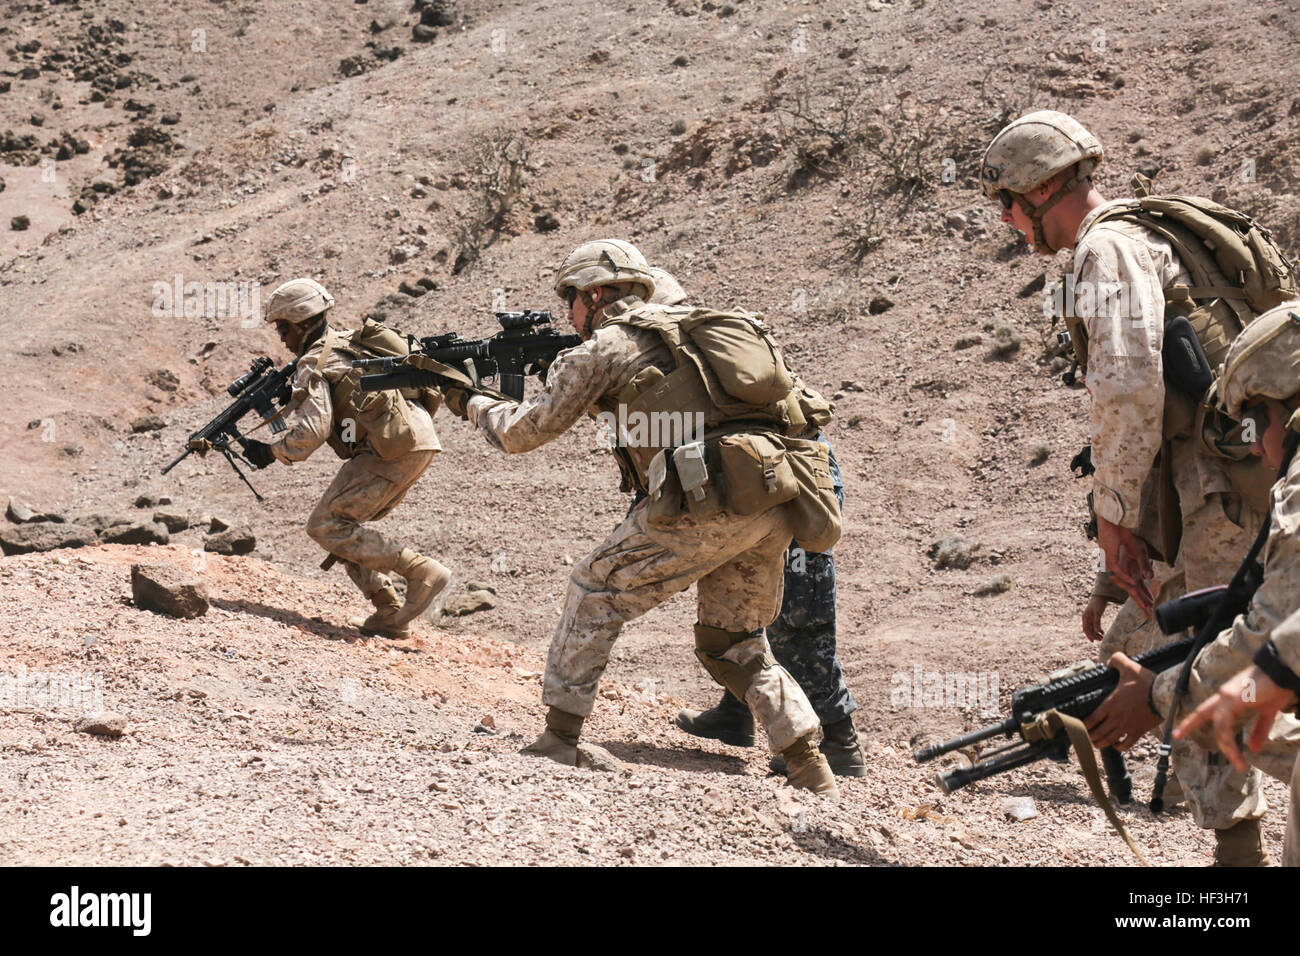 ARTA BEACH, Djibouti (July 22, 2015) U.S. Marines with Battalion Landing Team 3rd Battalion, 1st Marine Regiment, 15th Marine Expeditionary Unit, assault up to their fighting position during a squad-attack exercise.  The Marines of BLT 3/1 executed a series of attack and maneuver drills consisting of, machine gun, squad and night attacks.  Elements of the 15th Marine Expeditionary Unit are ashore in Djibouti for sustainment training to maintain and enhance the skills they developed during their pre-deployment training period.  The 15th MEU is currently deployed in support of maritime security  Stock Photo